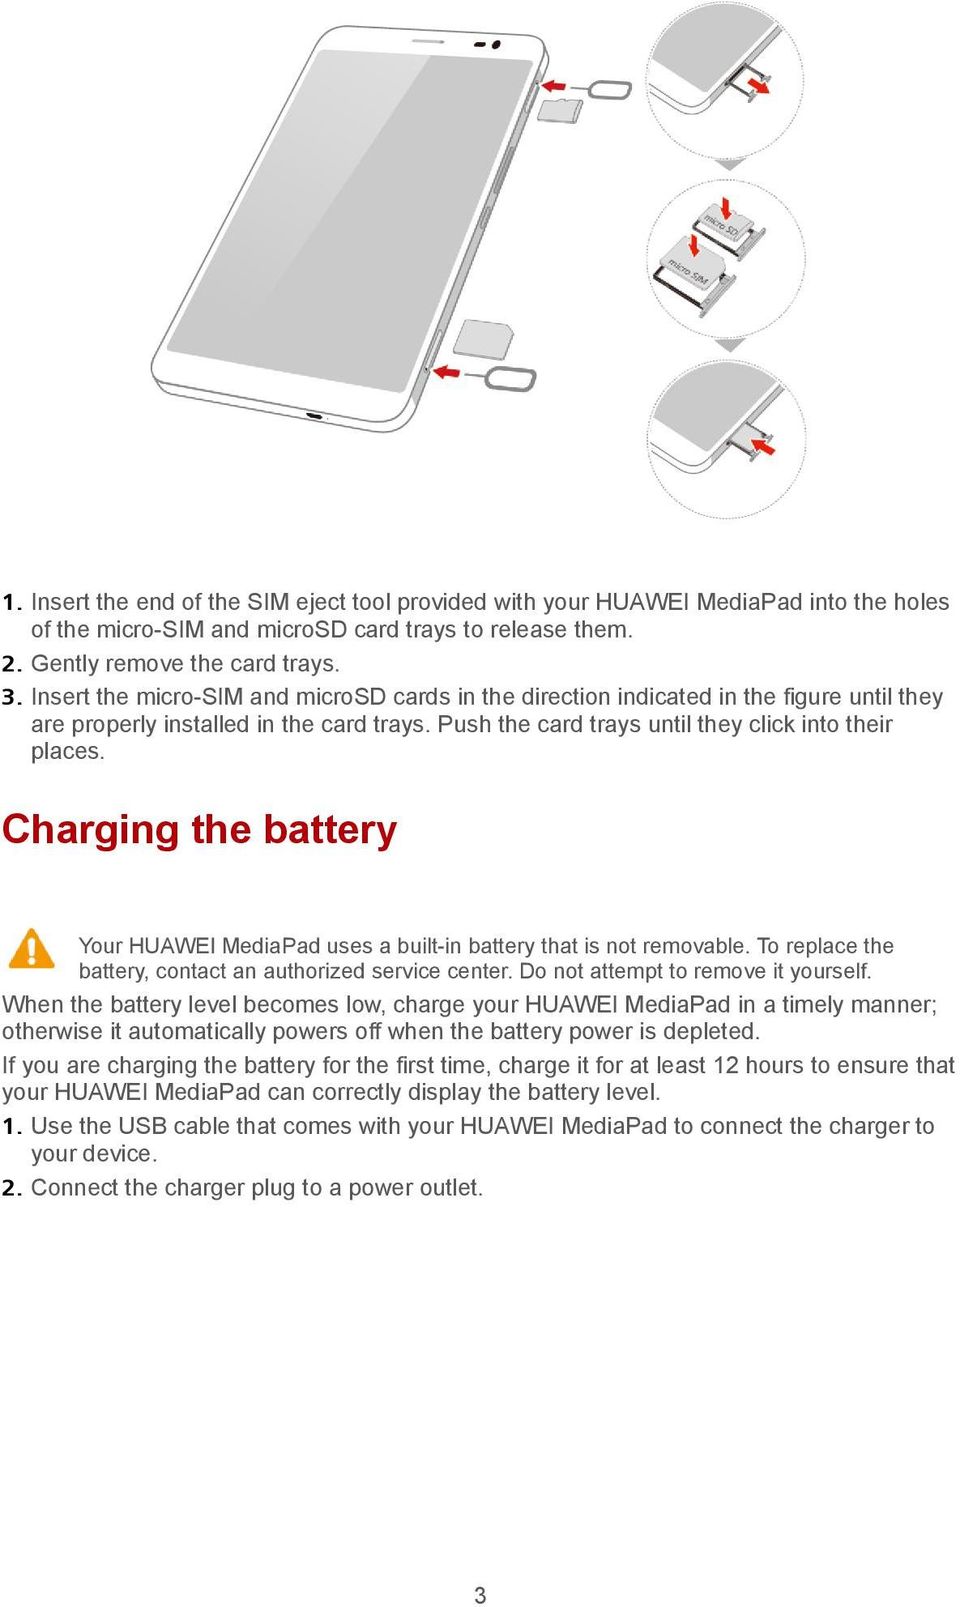 Charging the battery Your HUAWEI MediaPad uses a built-in battery that is not removable. To replace the battery, contact an authorized service center. Do not attempt to remove it yourself.